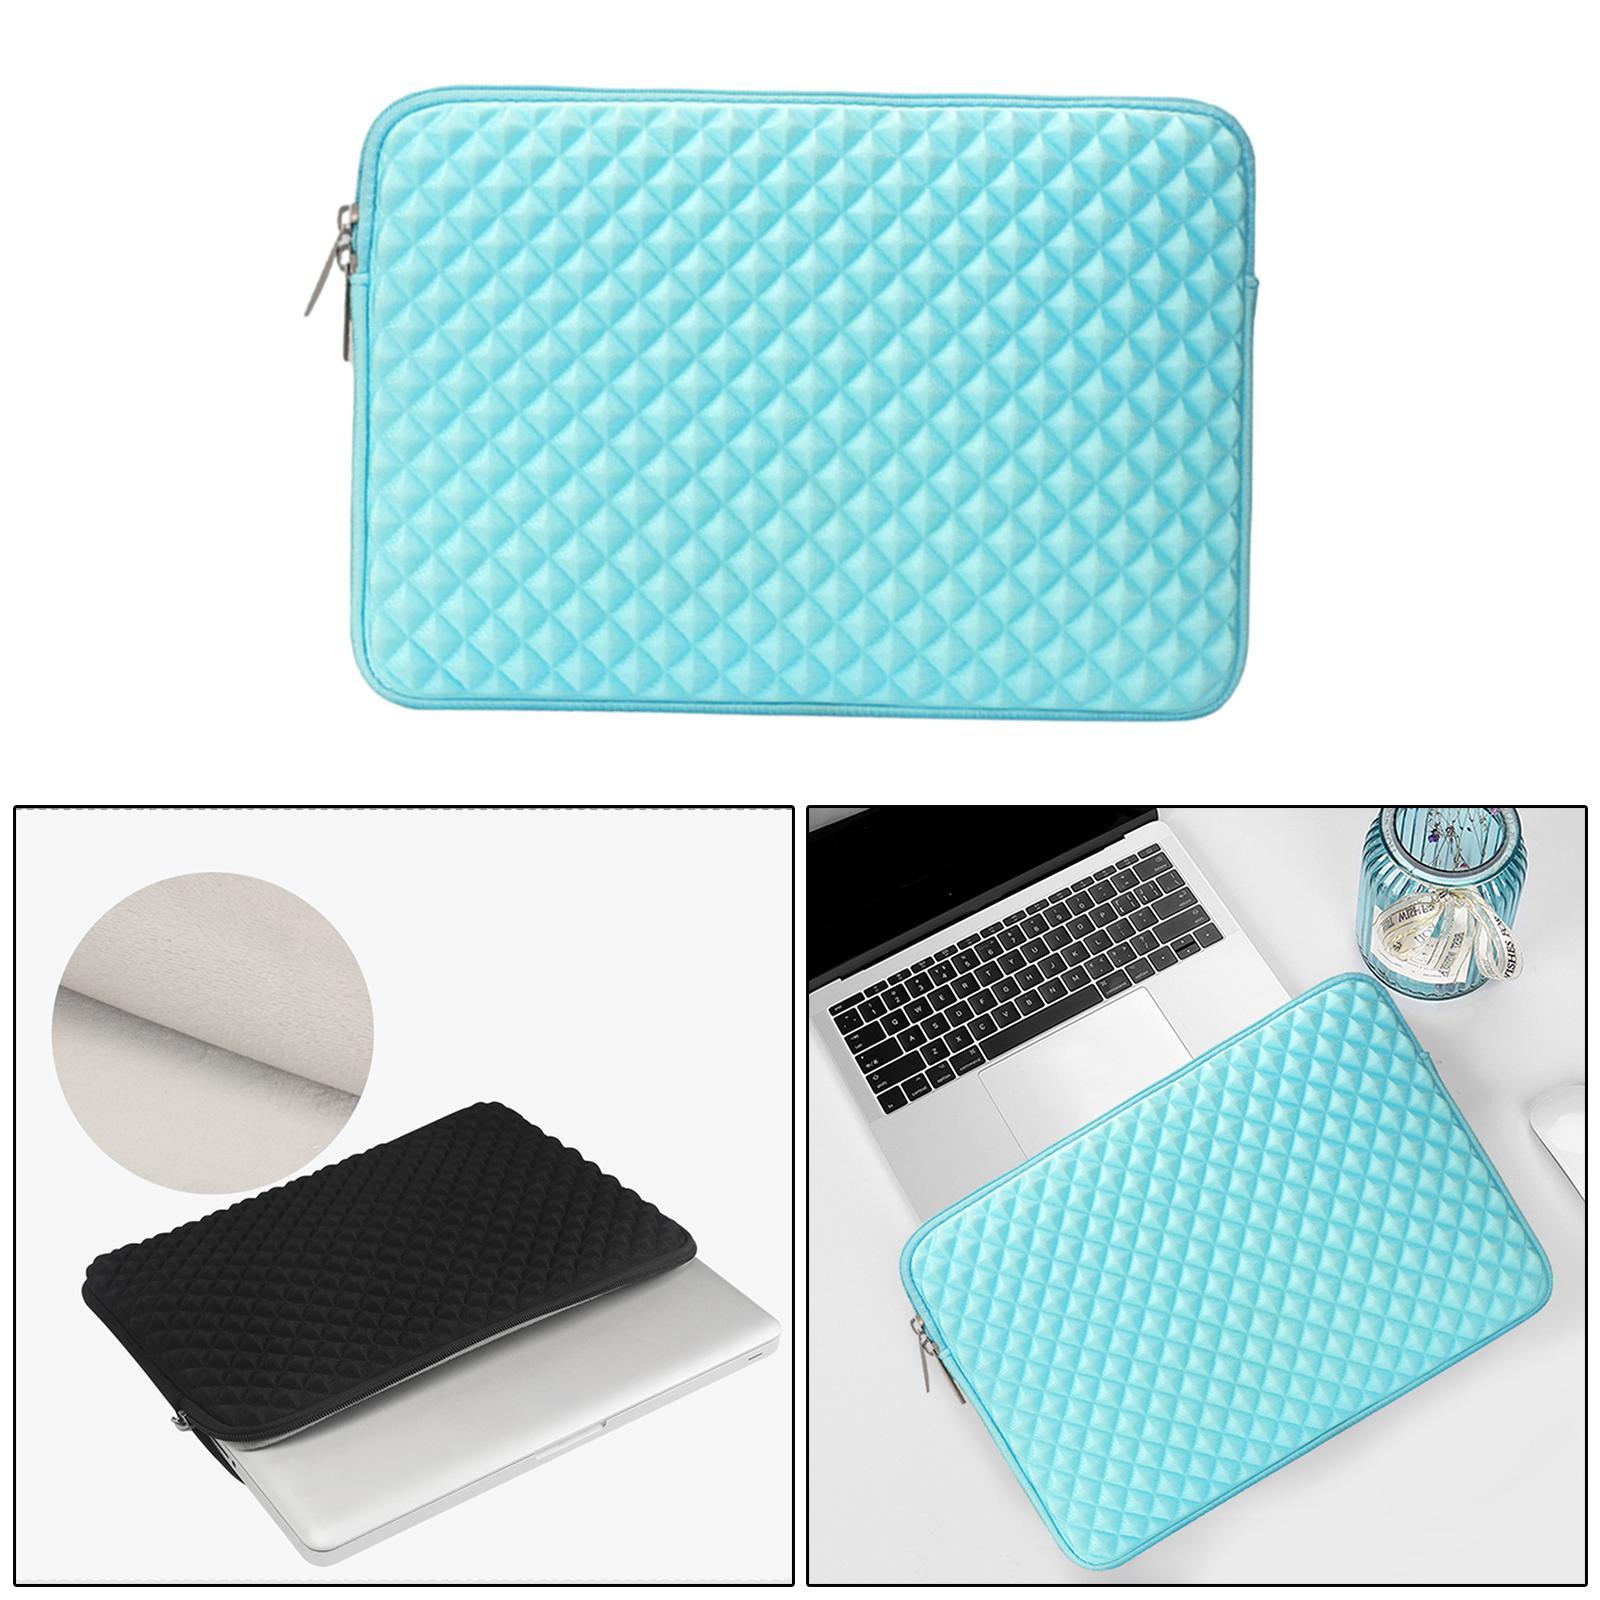 Laptop Sleeve Fits For Notebook Computer Neoprene Bag Cover Blue 13inch